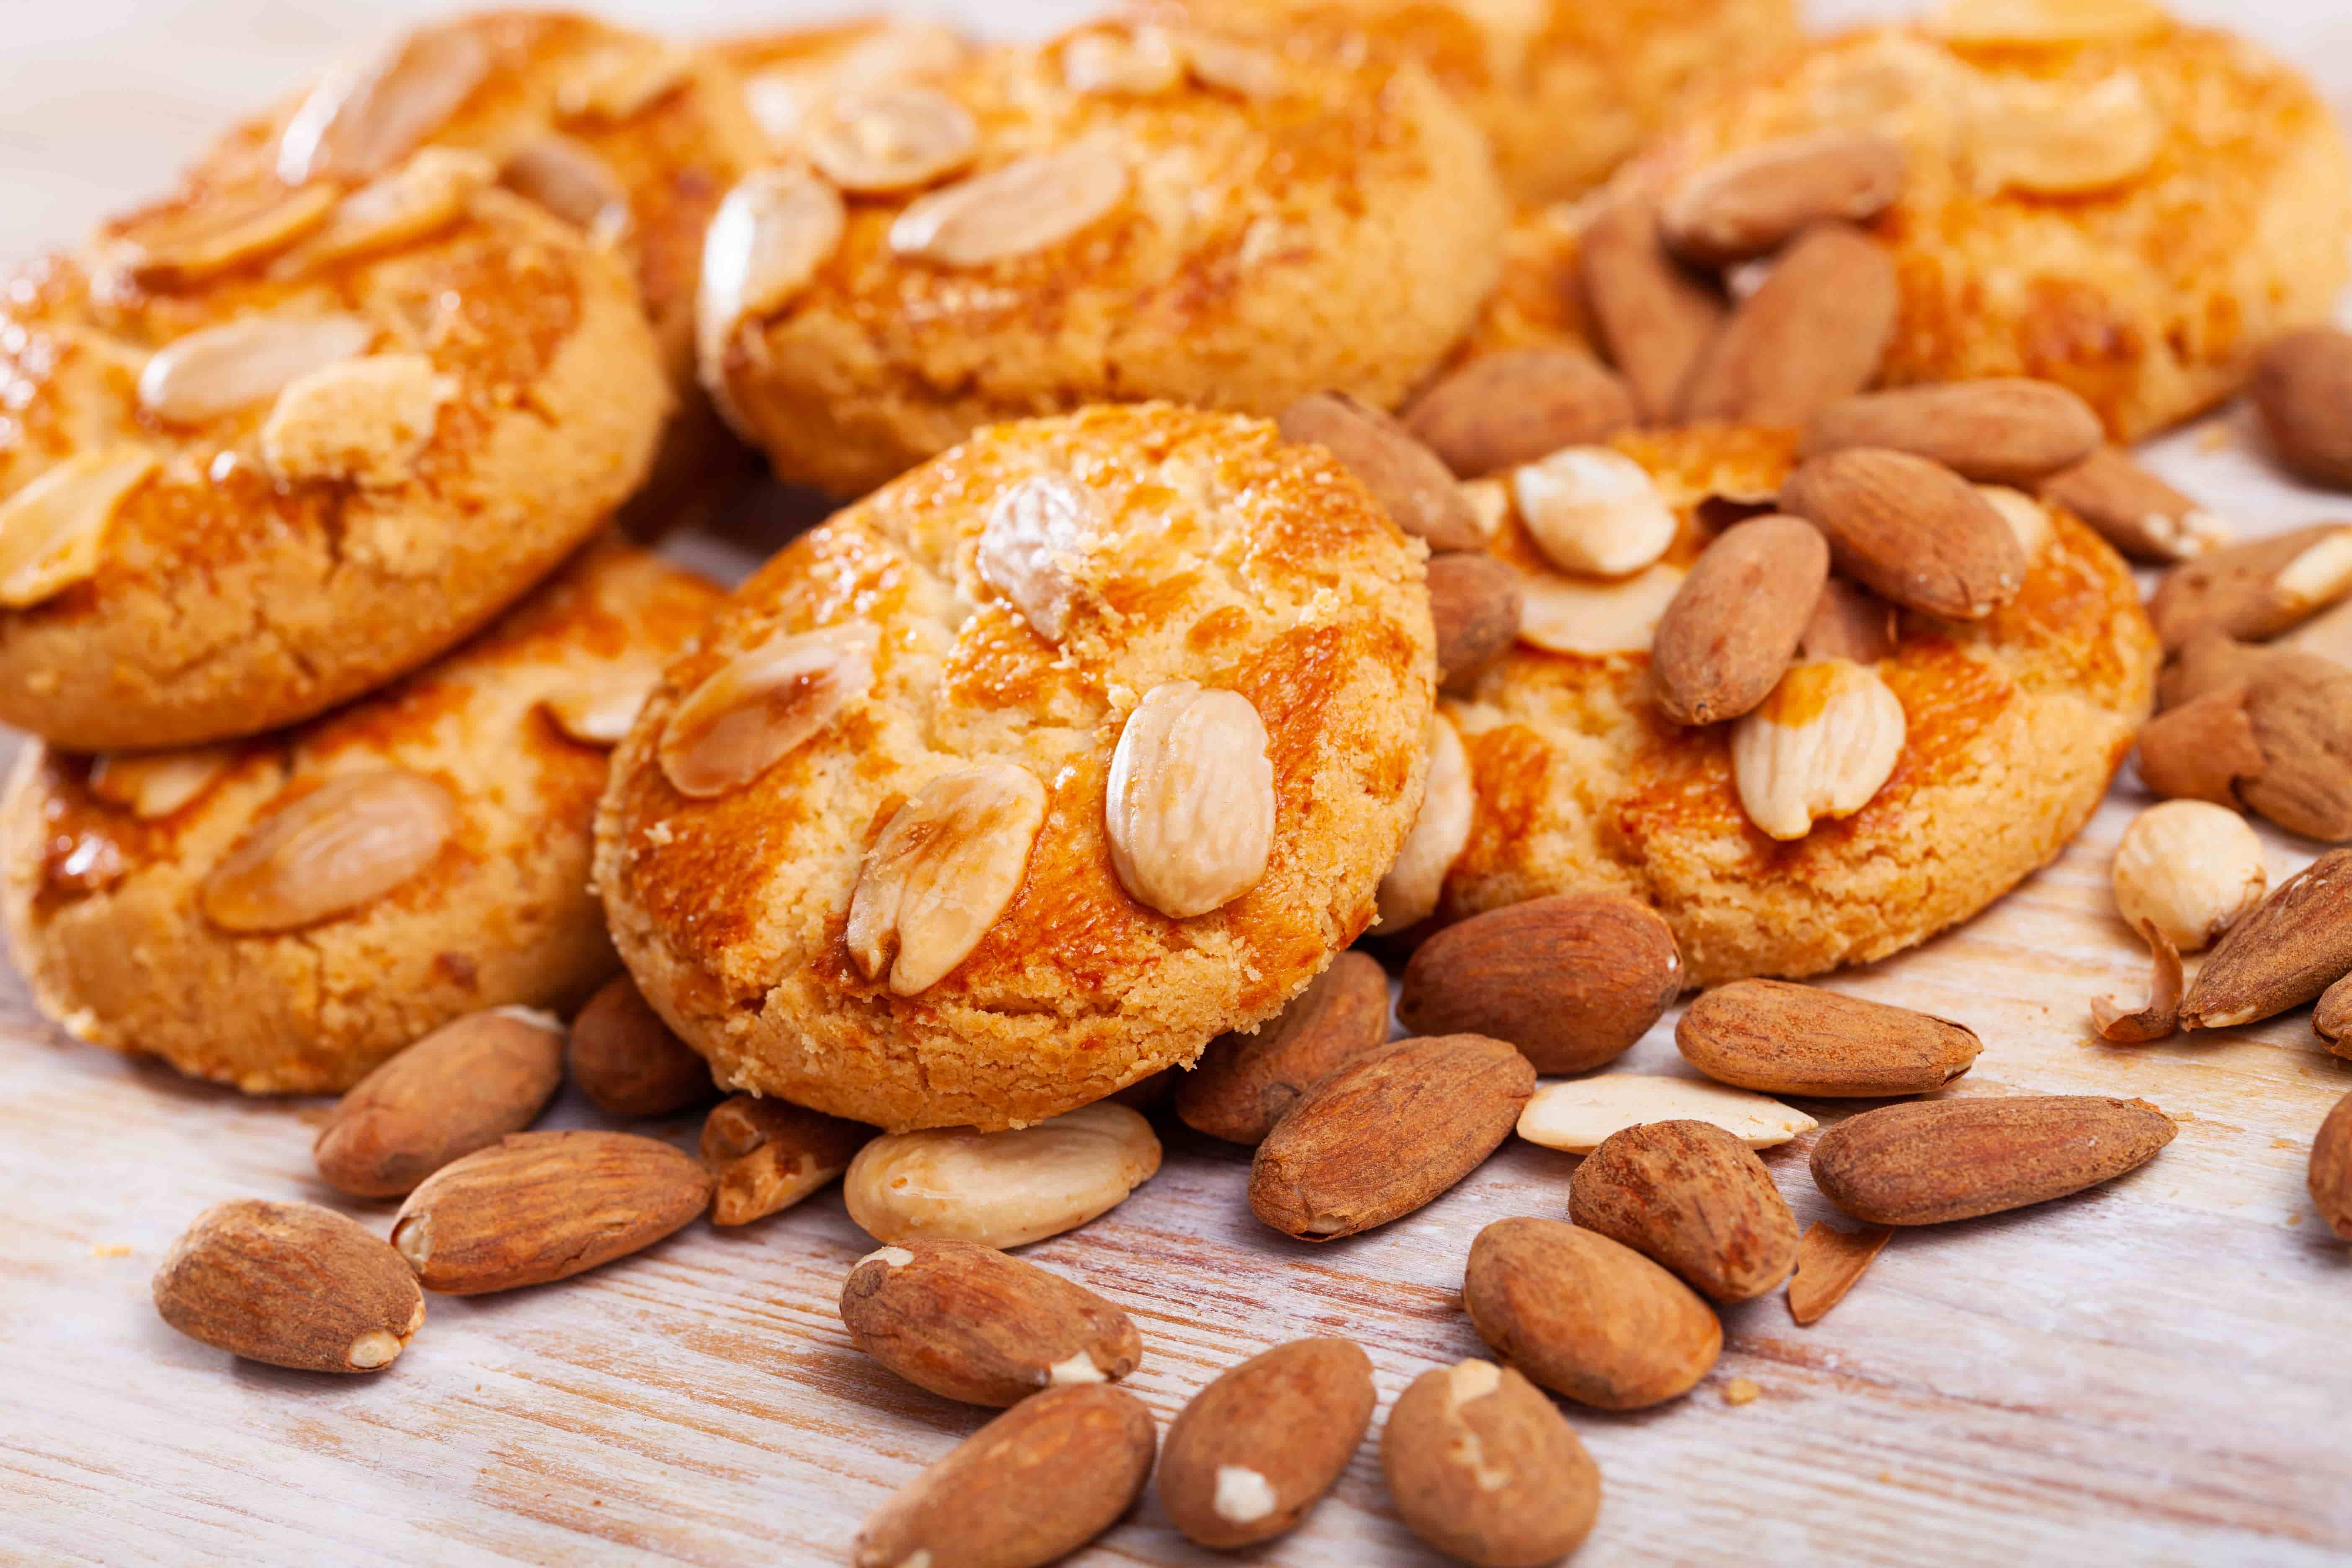 New products with almonds: the best nut for the NPD